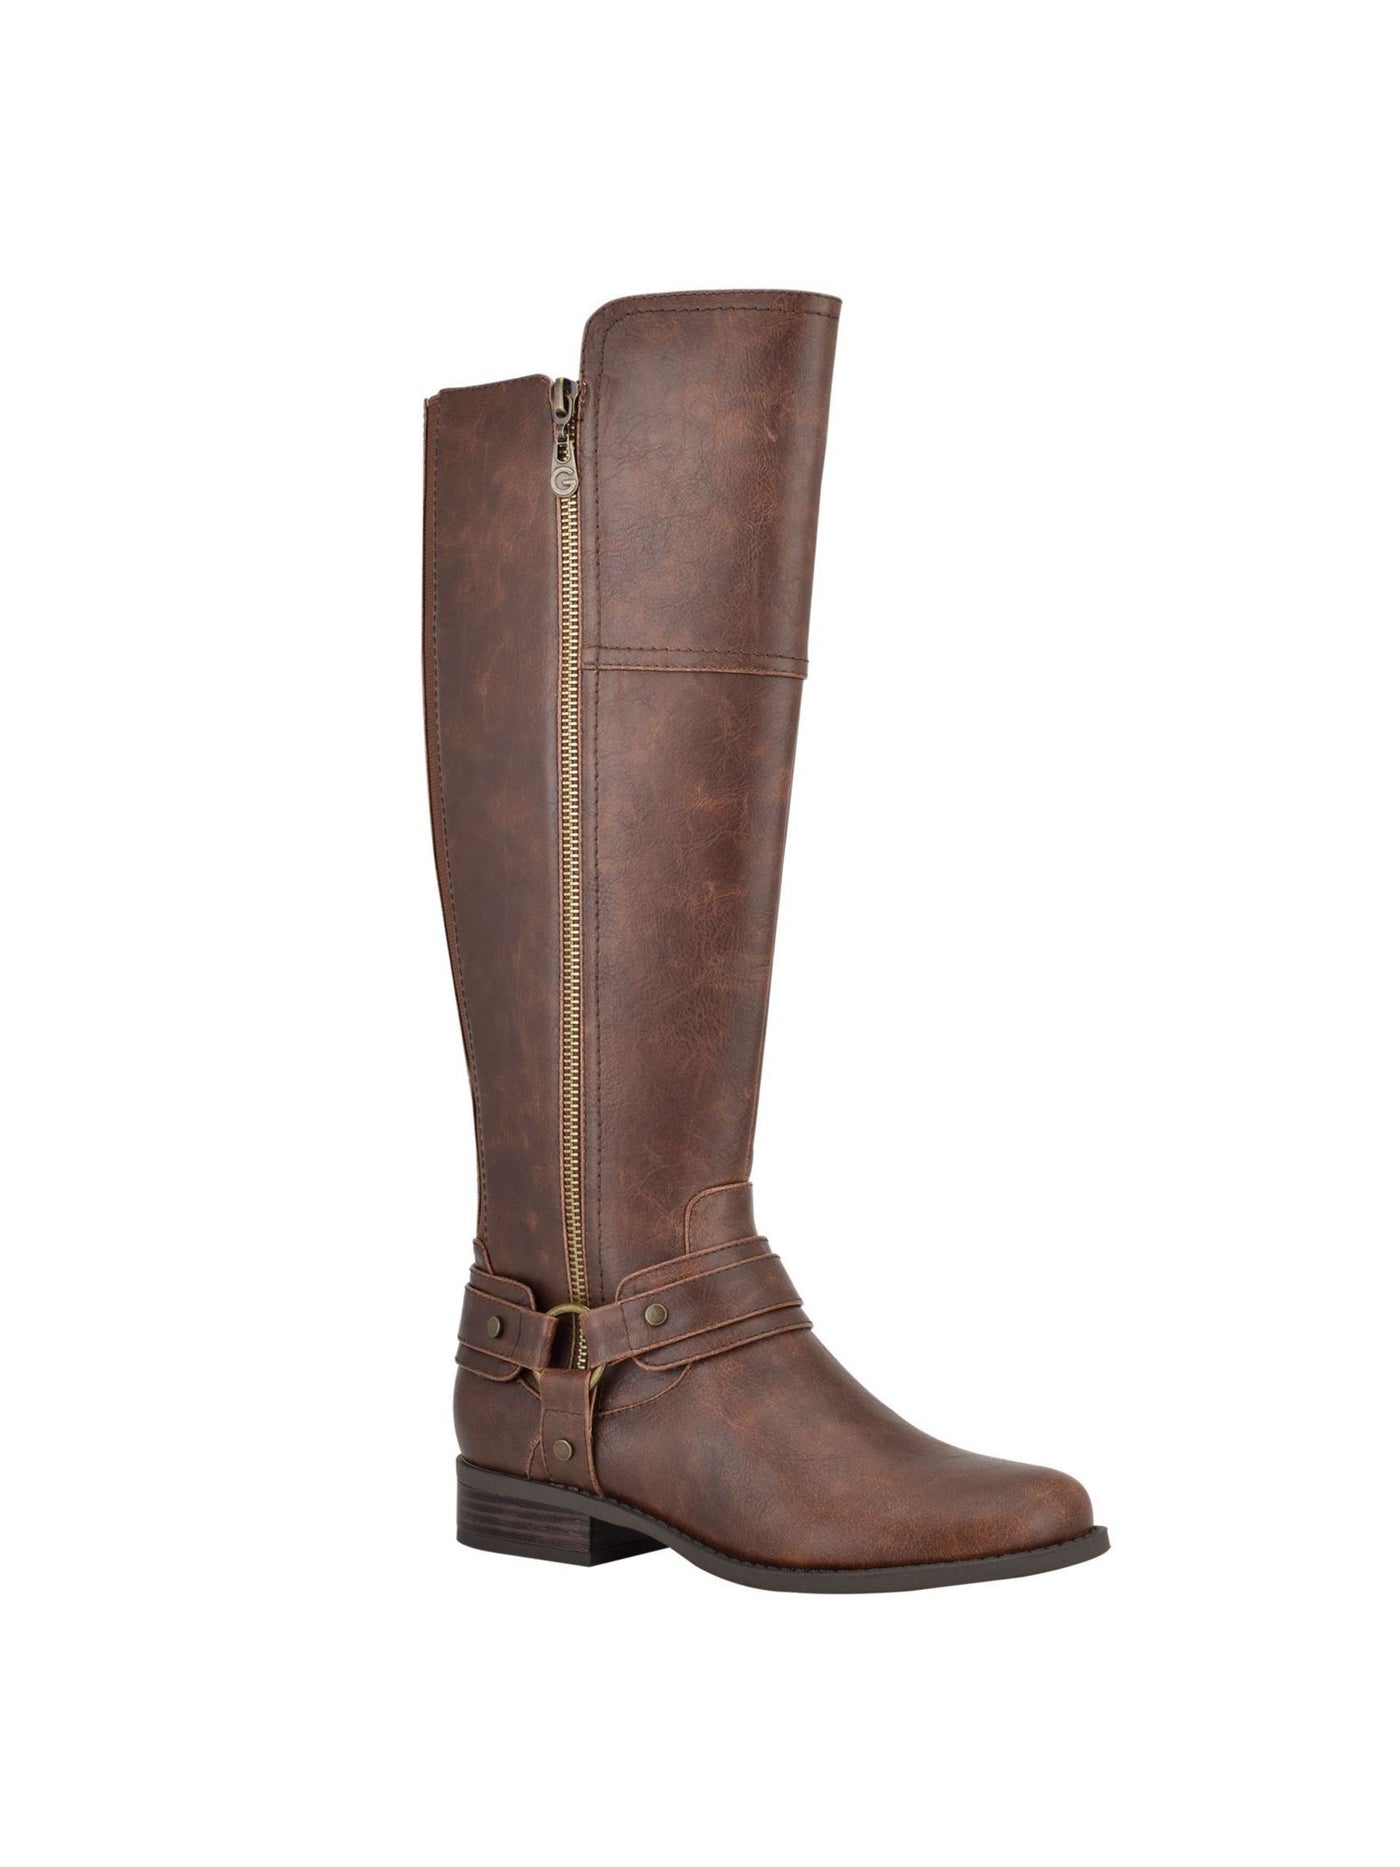 GBG LOS ANGELES Womens Brown Flex Gore Back Accents Gold-Tone Hardware Accent Zipper Accent Buckle Accent Harlea Round Toe Block Heel Zip-Up Riding Boot 5 M WC